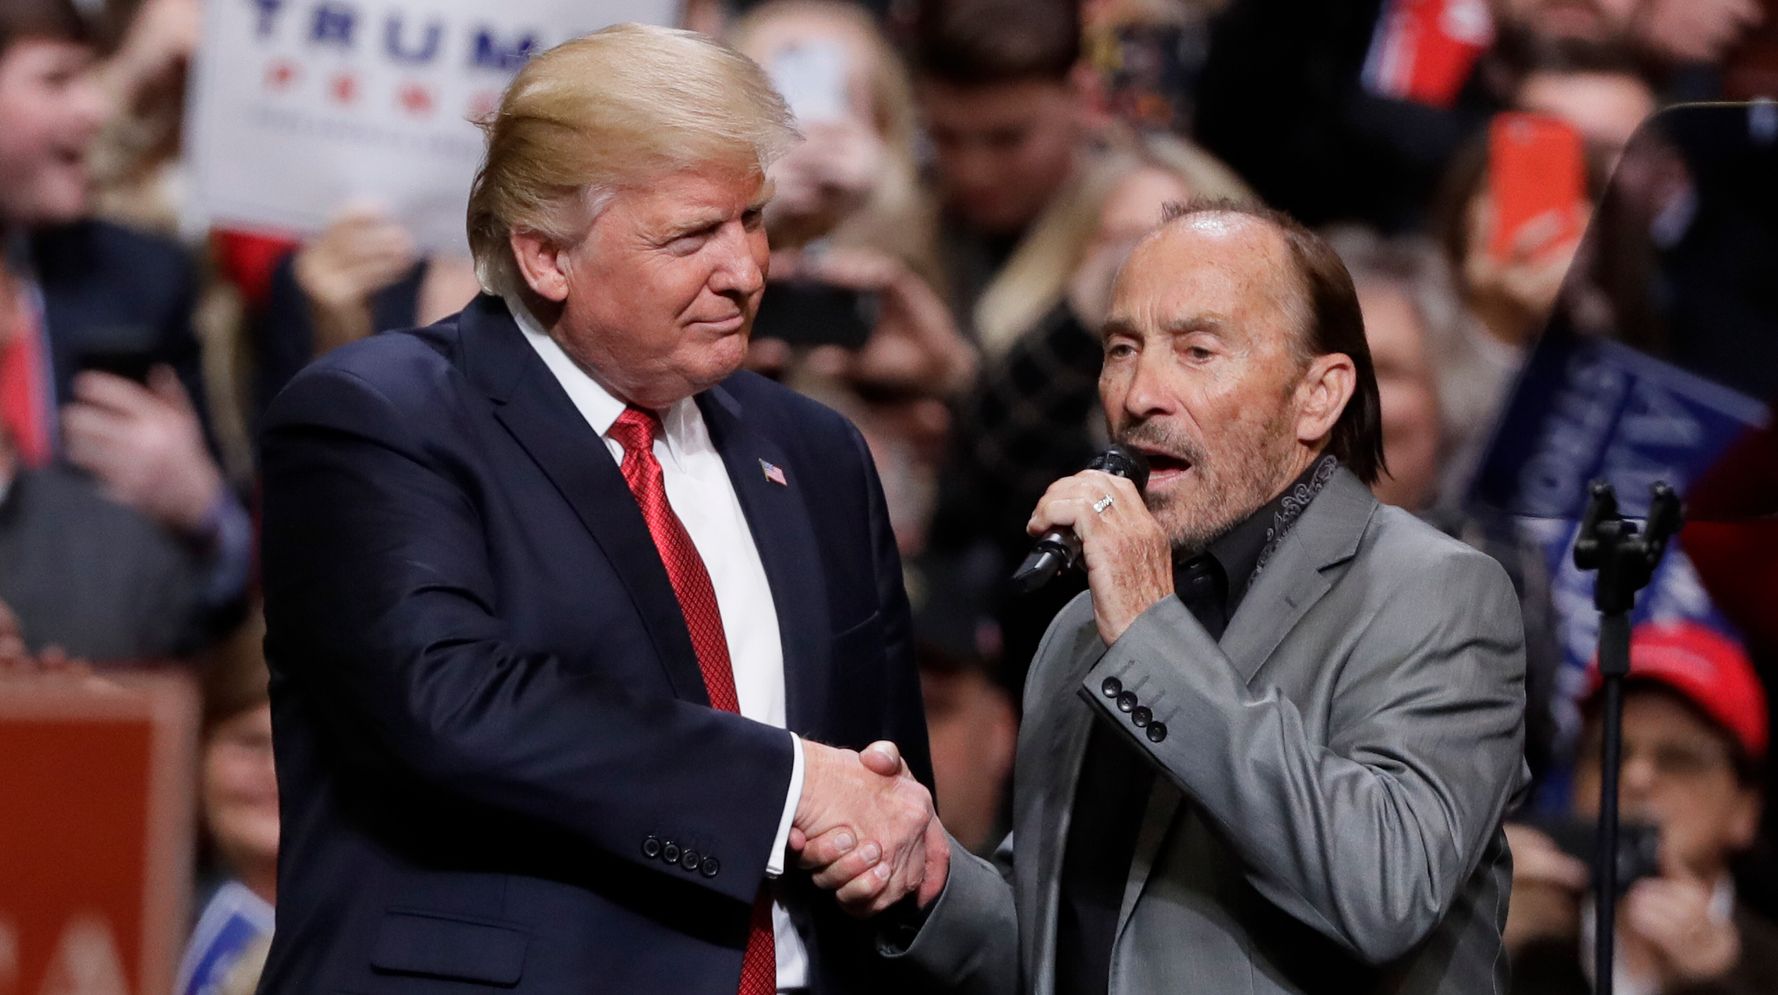 Lee Greenwood Pulls Out Of NRA Concert After Uvalde Shooting